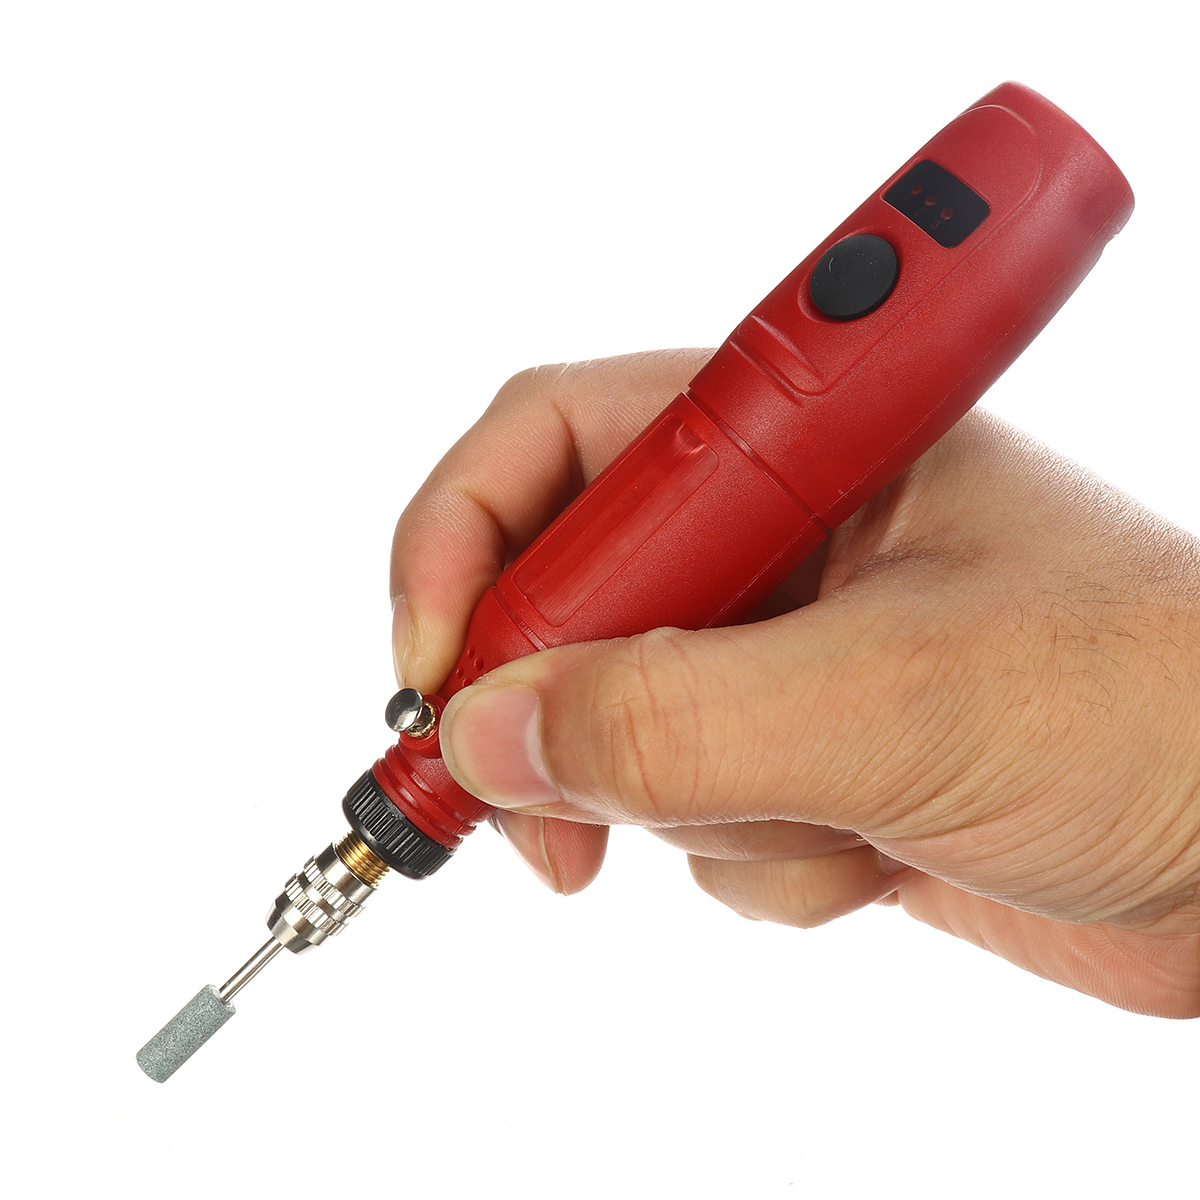 3-Speeds-Electric-Grinding-Pen-Grinder-Mini-Drill-Small-Polishing-Grinding-Tool-1785690-5